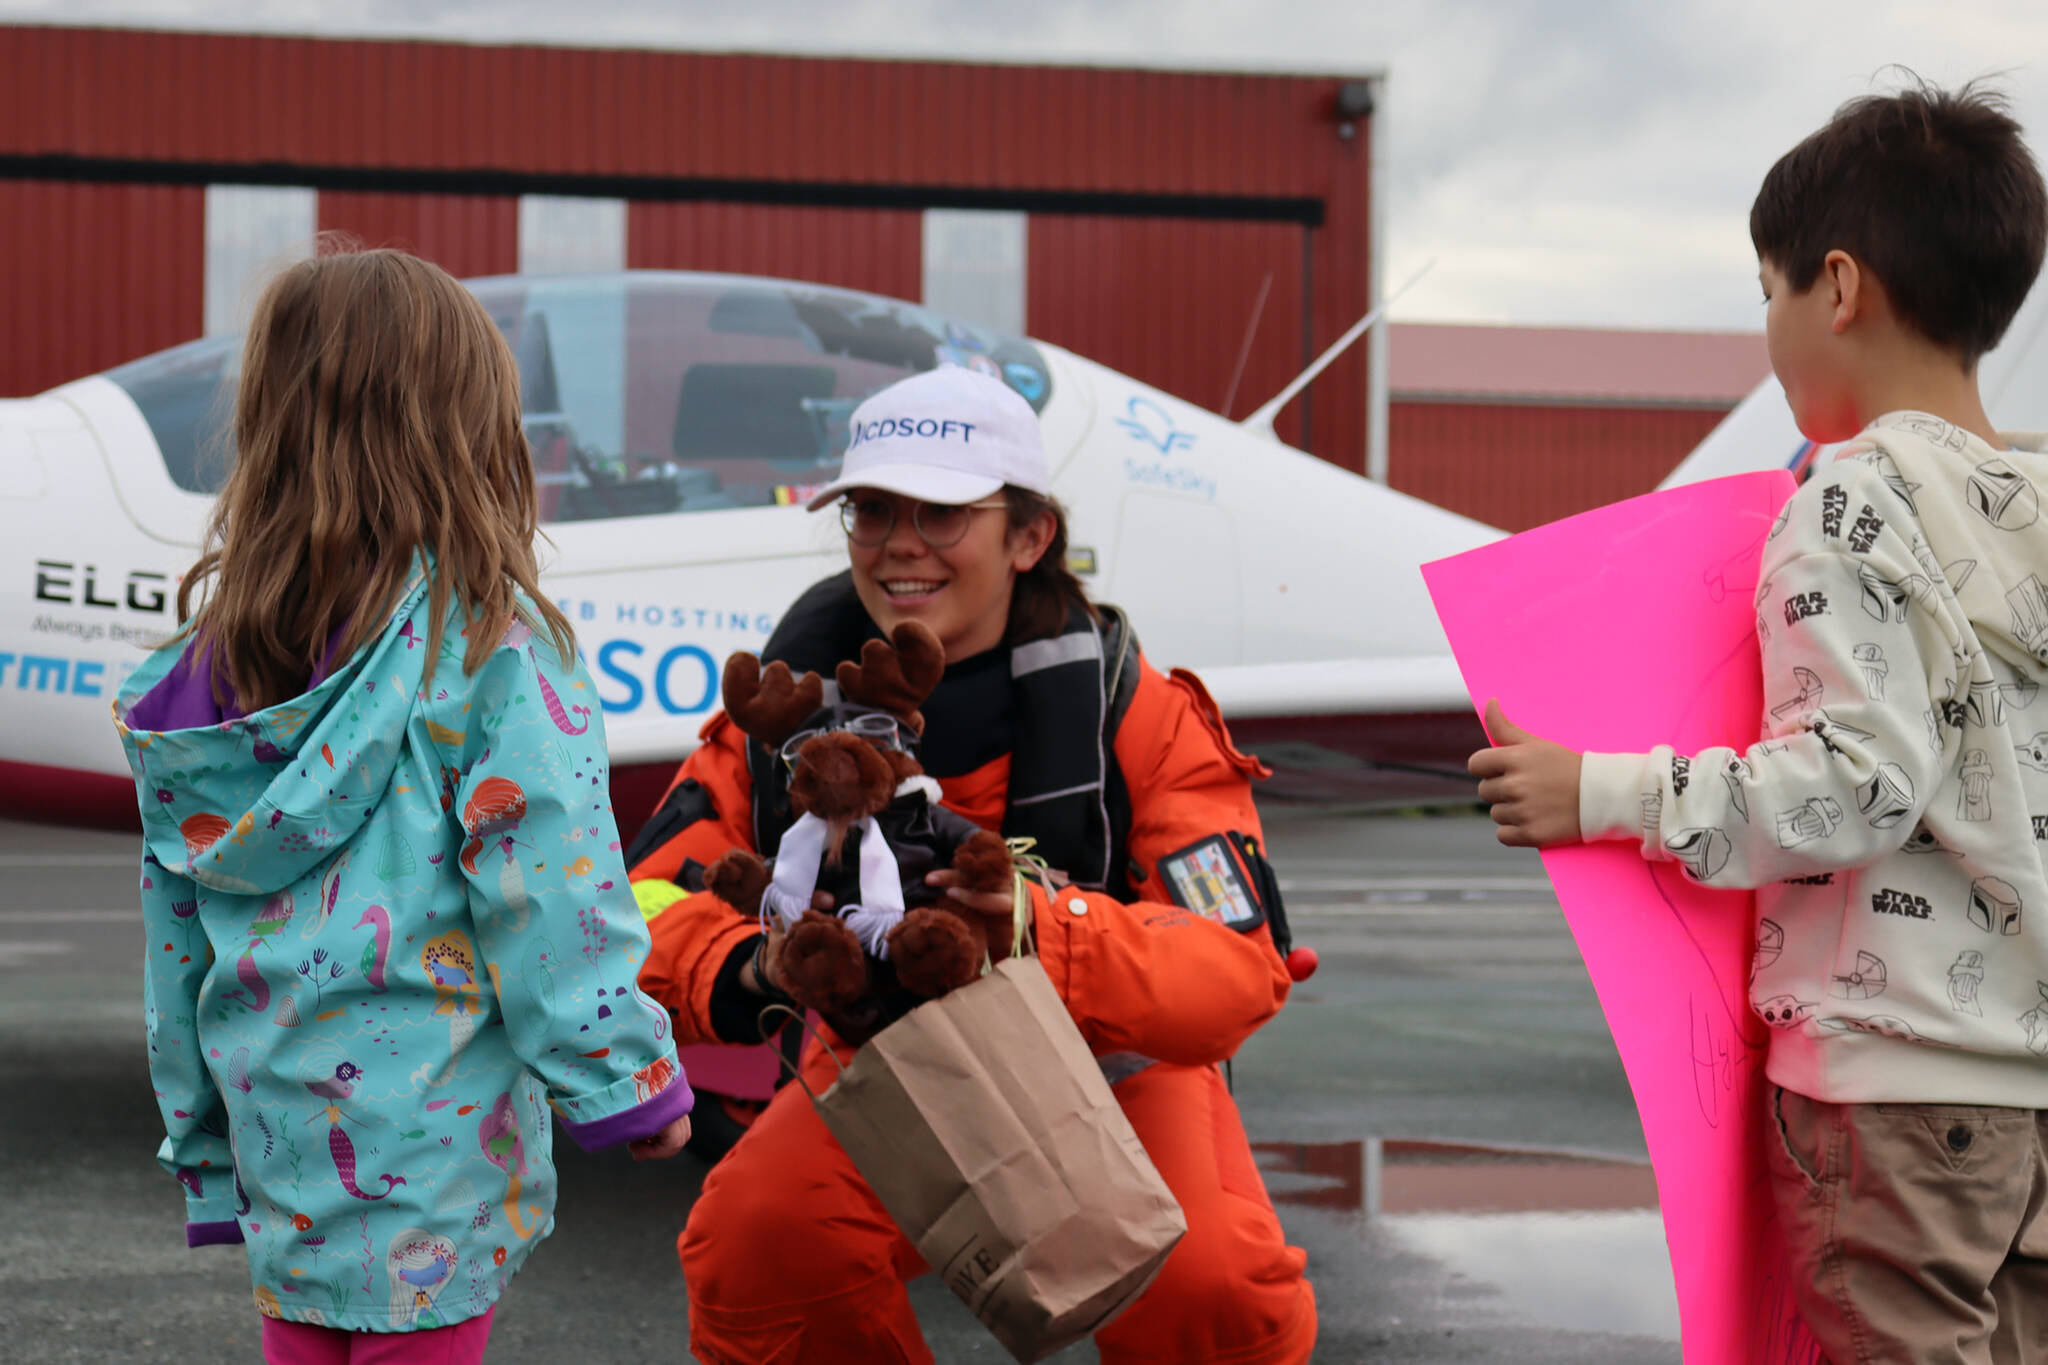 Amelia Conrad, 4, presents Zara Rutherford with a stuffed moose donning aviator goggles while Mclain Patterson, 7, holds a sign reading “Fly Zara Fly!” at Ward Air. Rutherford is flying her way around the world in pursuit of the Guinness world record for youngest woman solo pilot to circumnavigate the world. (Ben Hohenstatt / Juneau Empire)